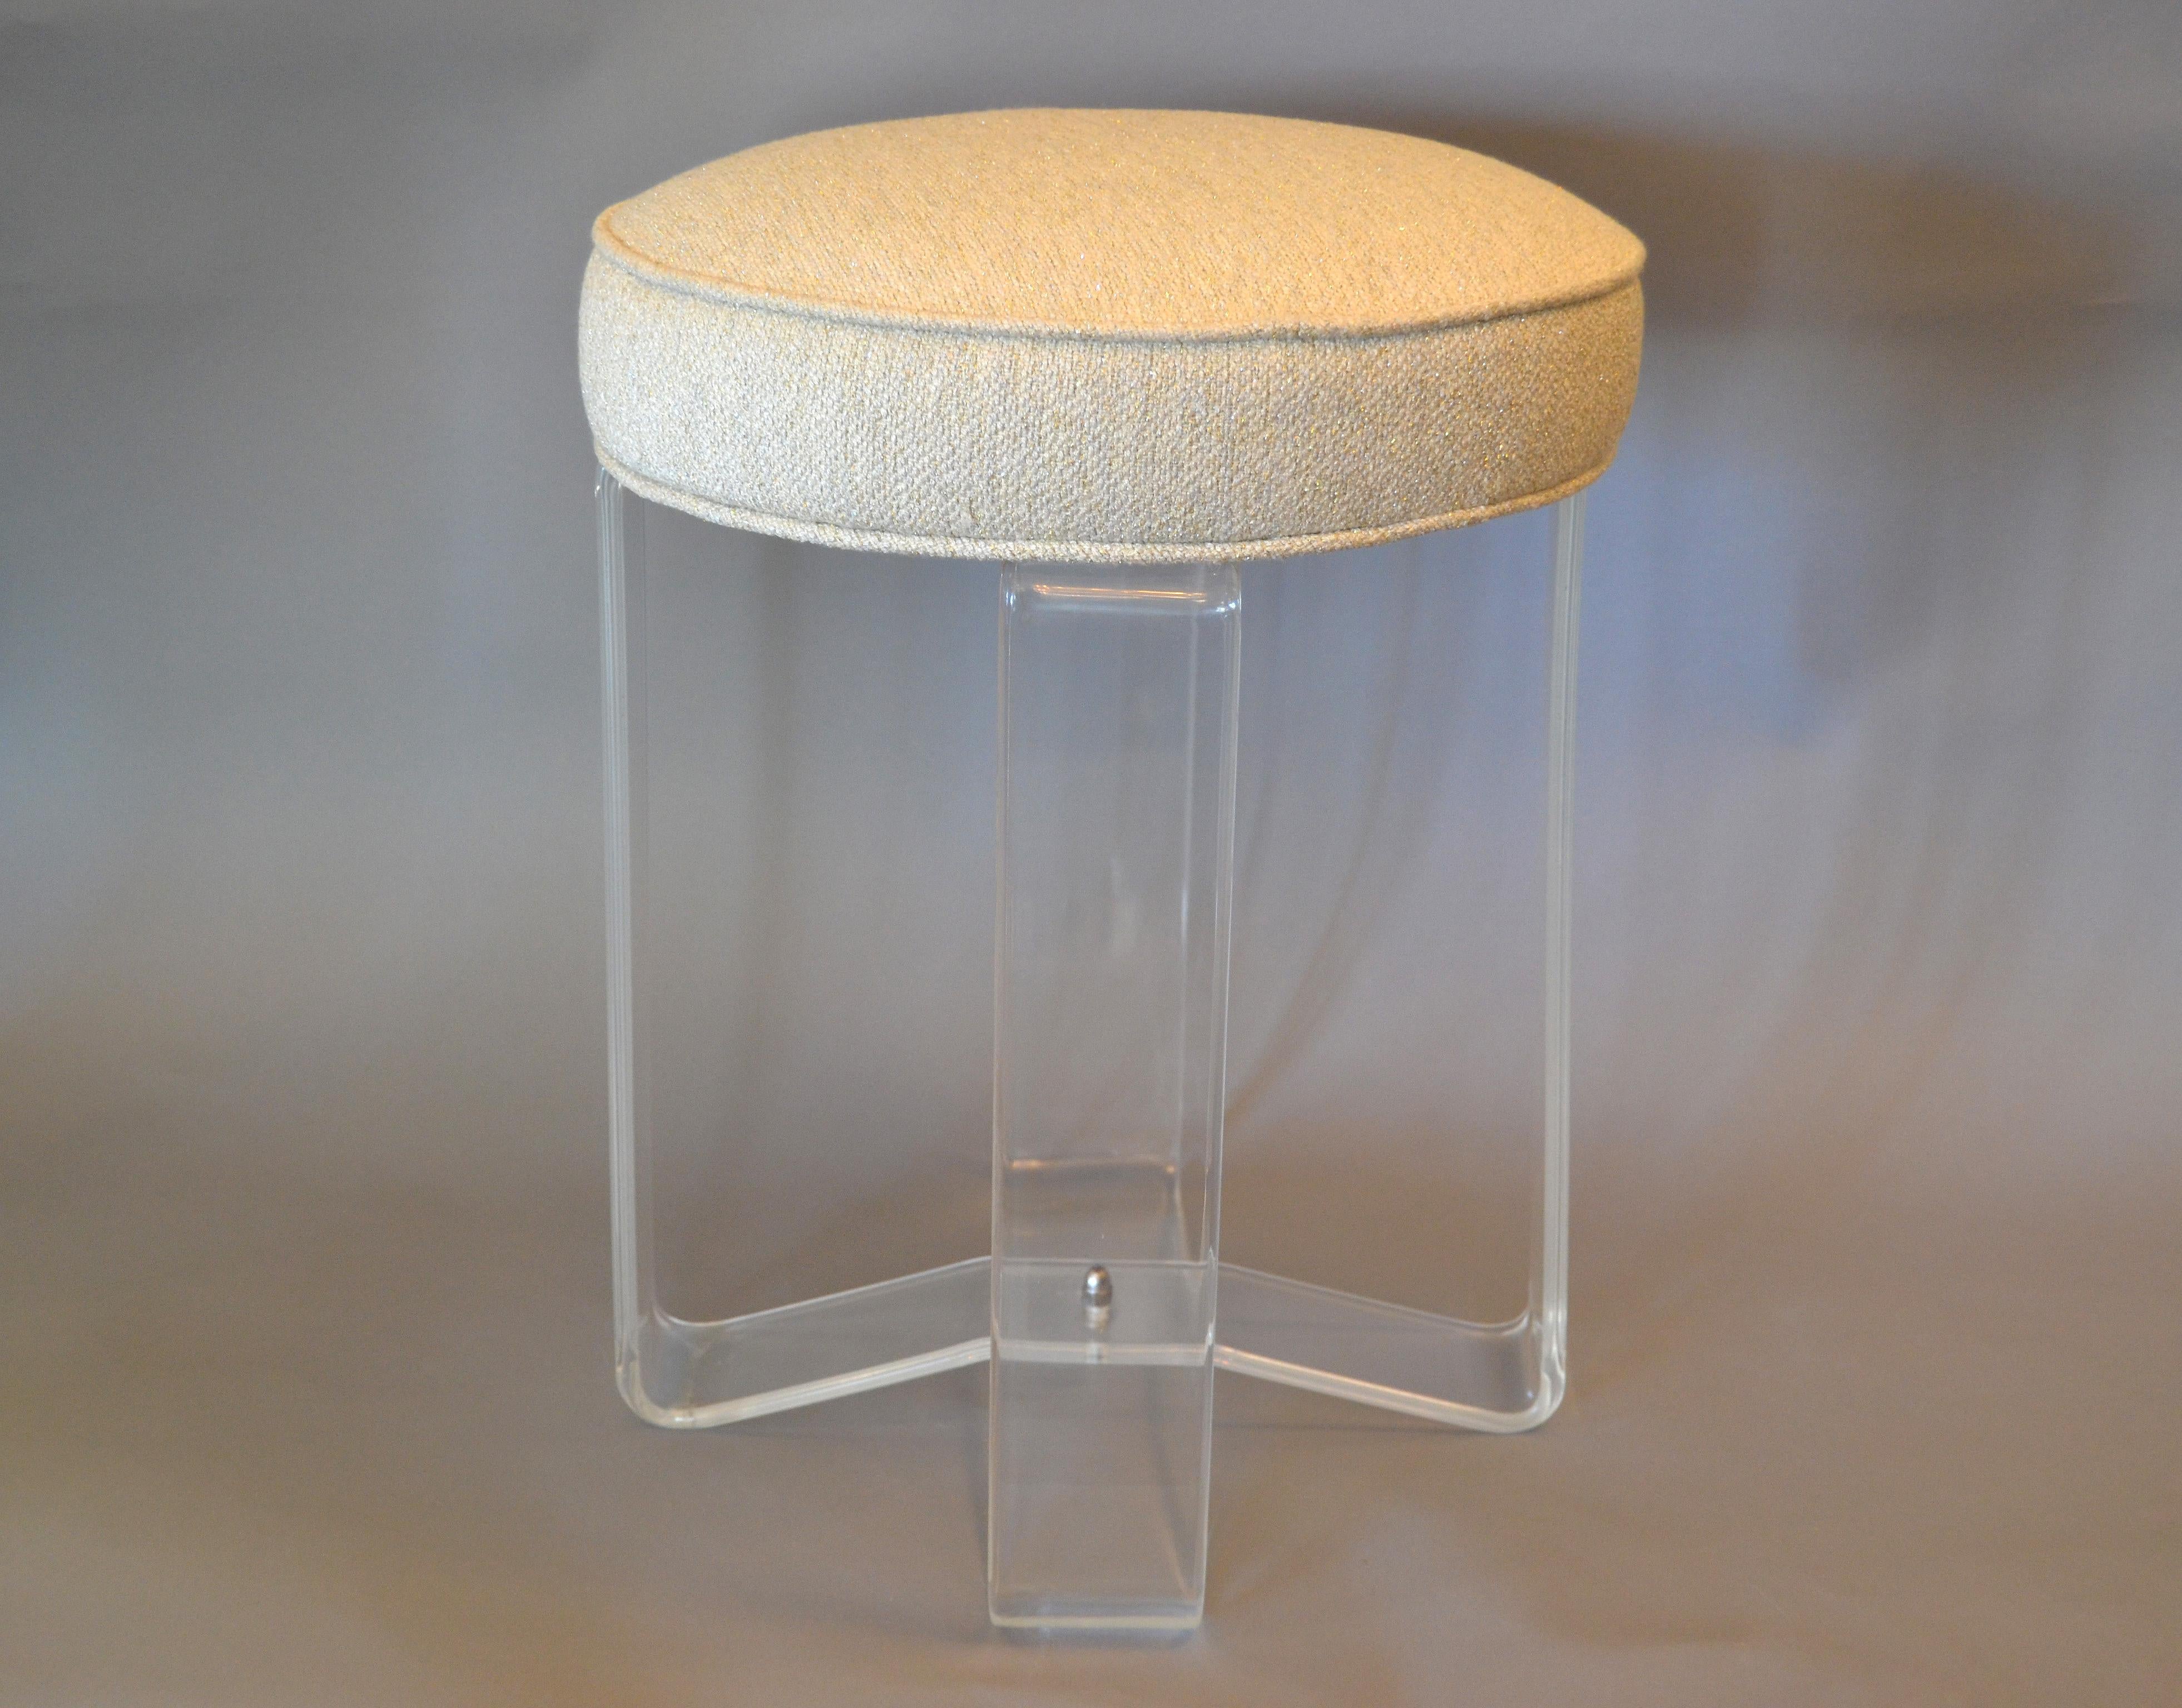 20th Century Hollywood Regency Round Lucite Stool Crissed-Cross Legs and Fabric Seat